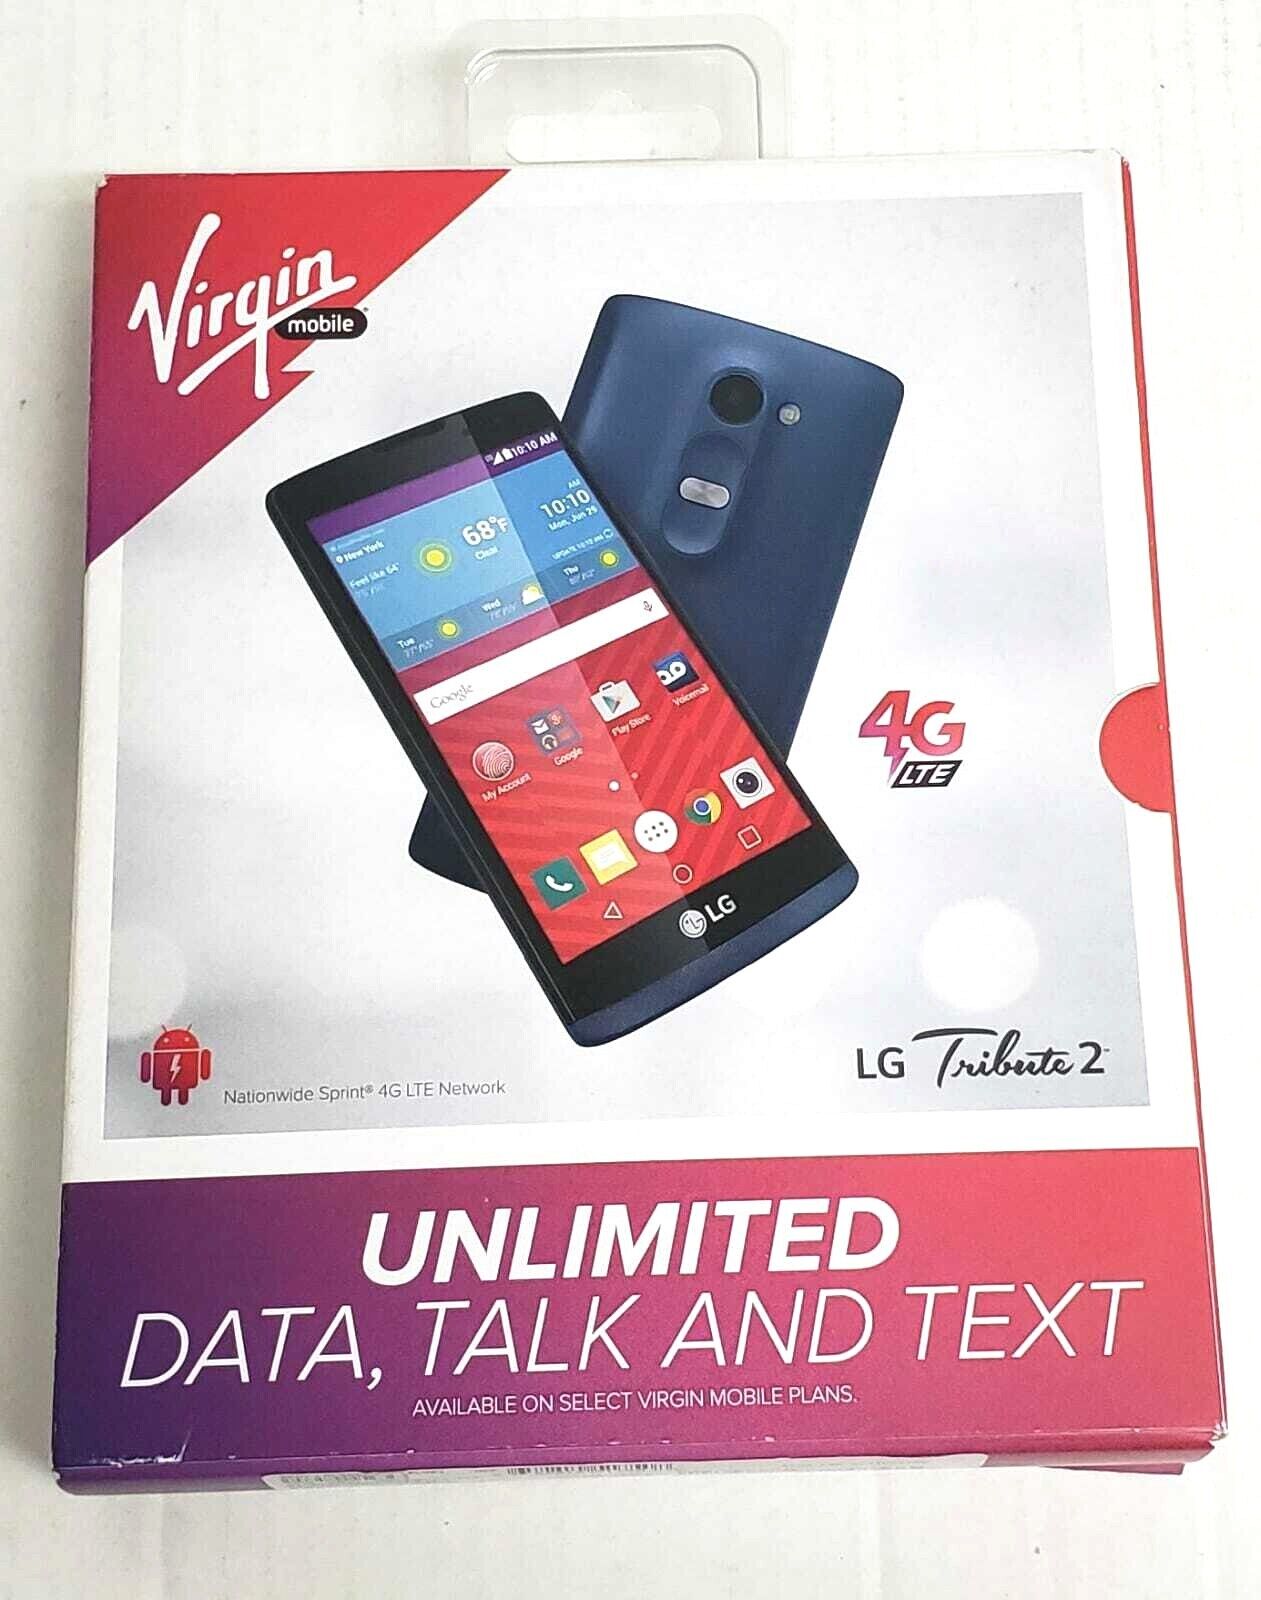 Virgin Mobile - LG Tribute 2 with 8GB Memory Prepaid Cell Phone - Blue